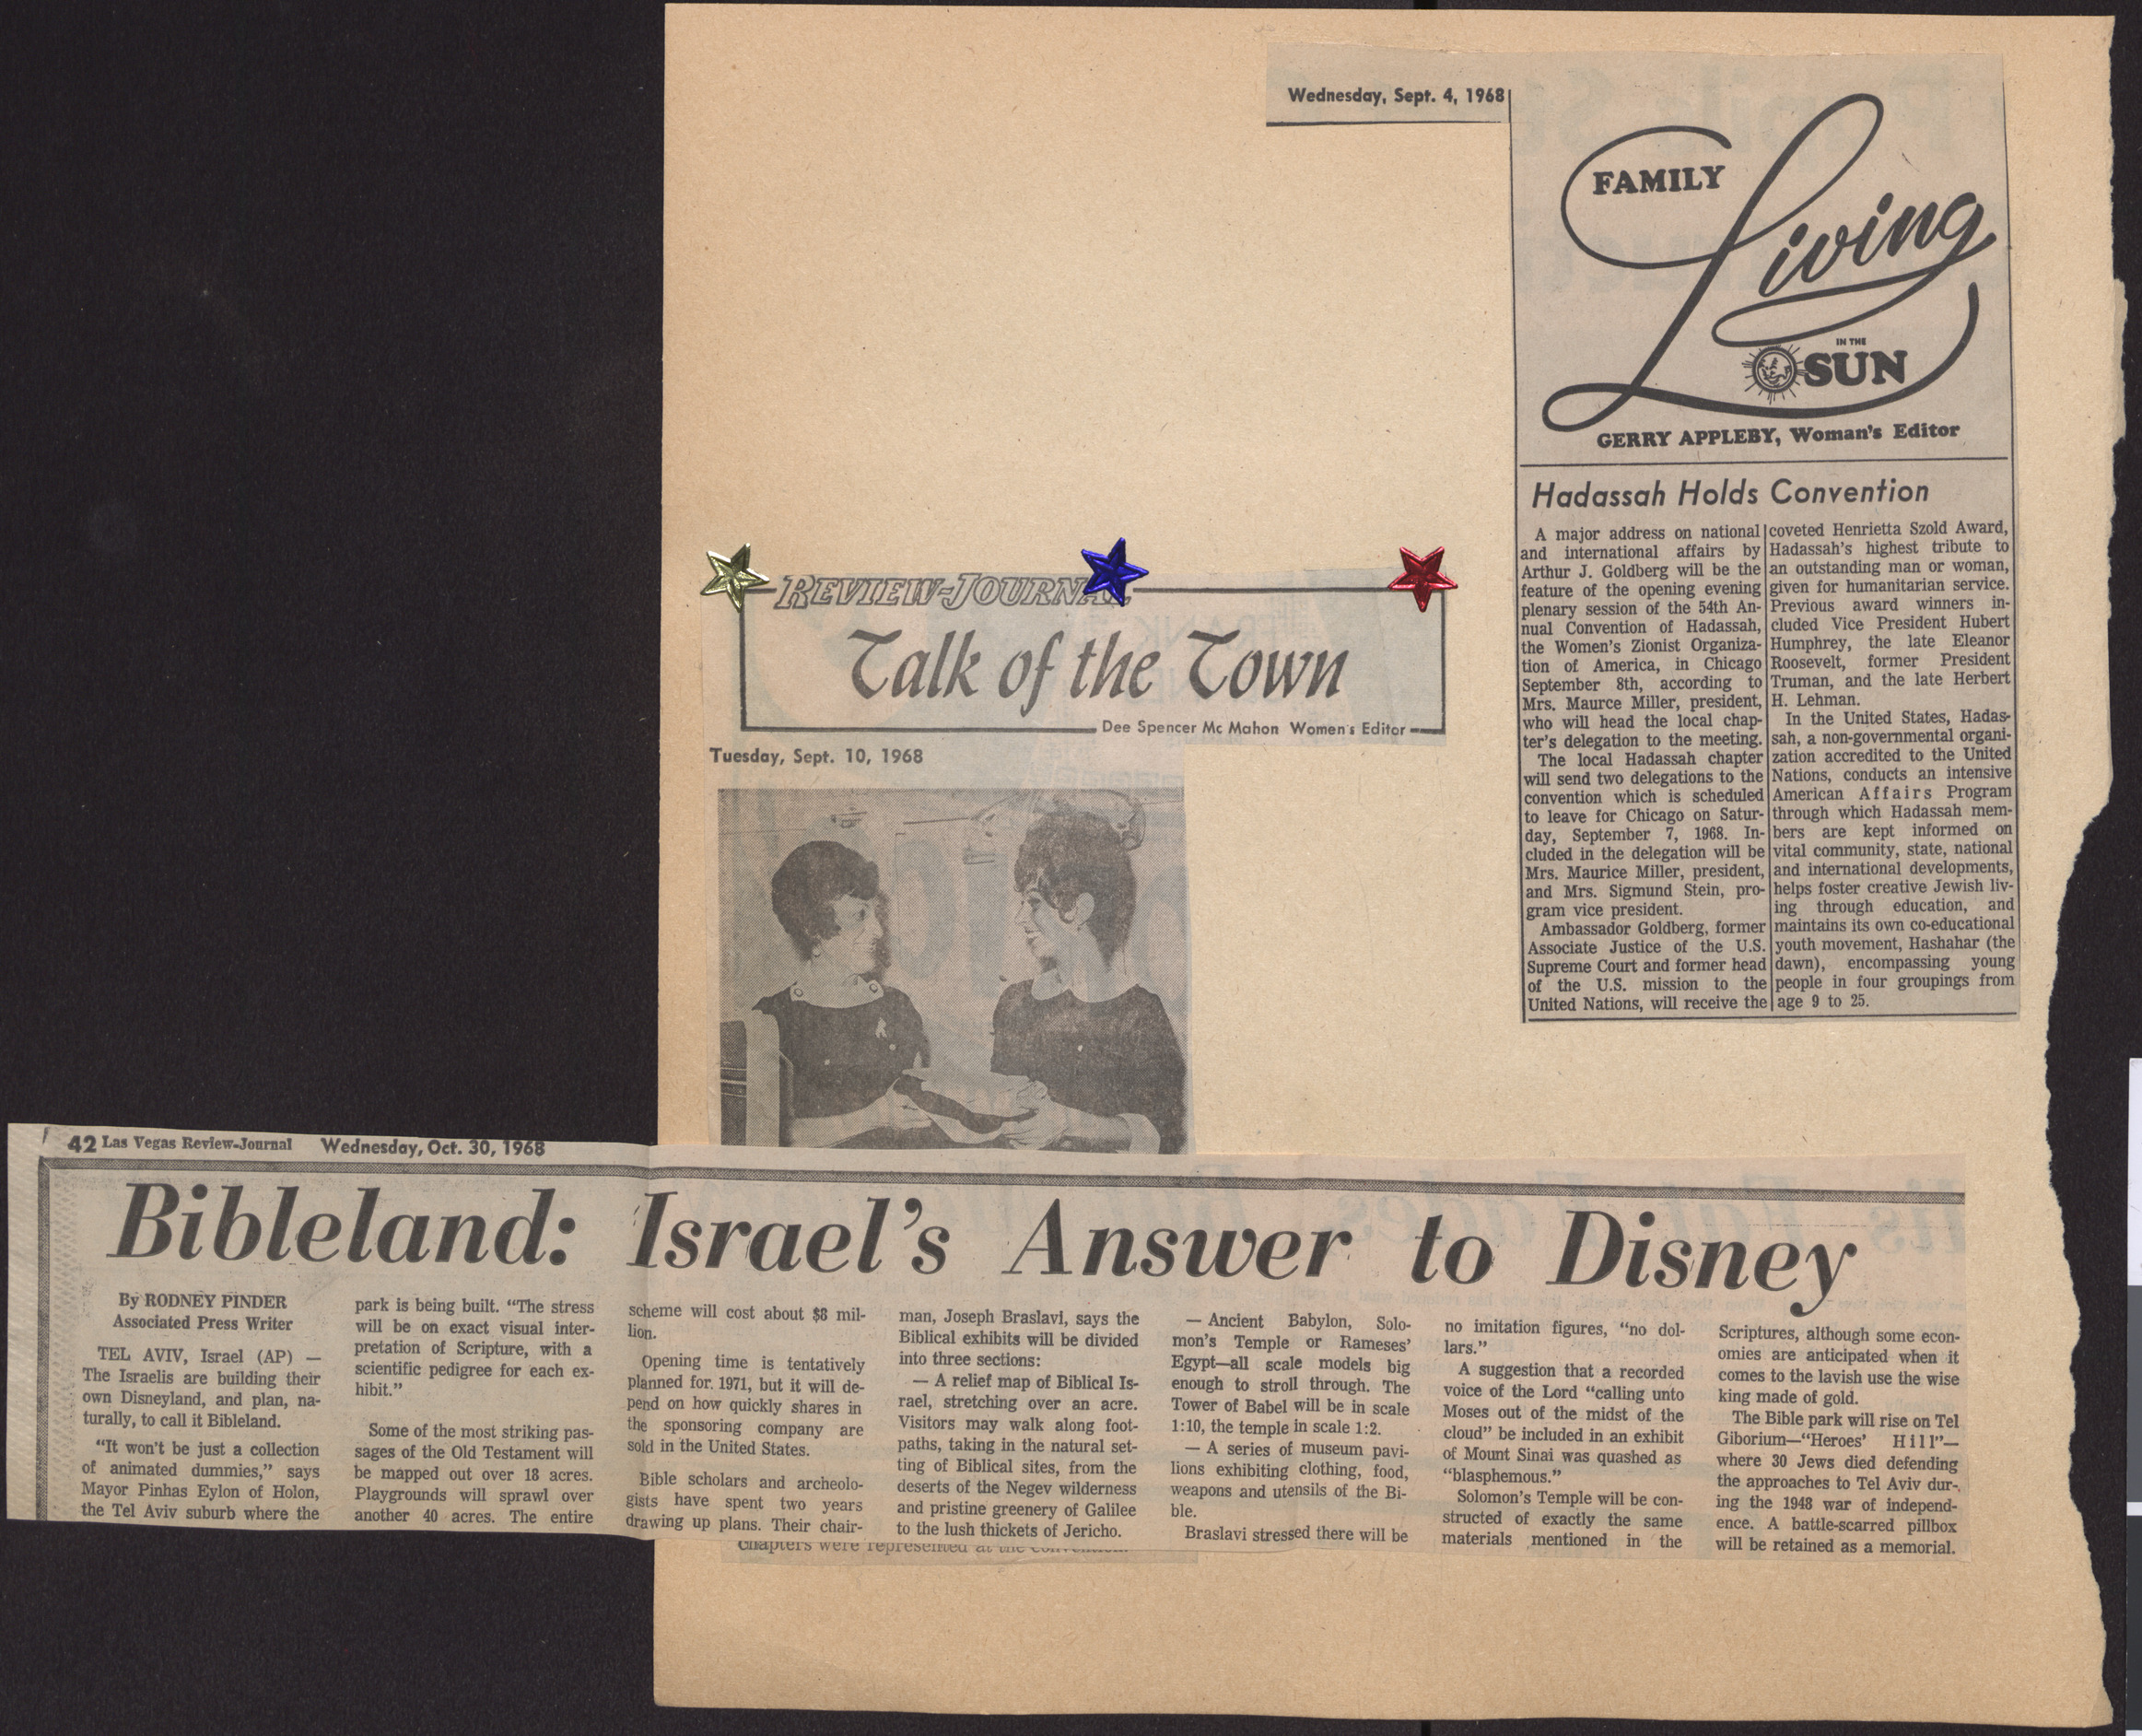 Newspaper clipping, Bibleland: Israel's Answer to Disney, Las Vegas Review-Journal, October 30, 1968